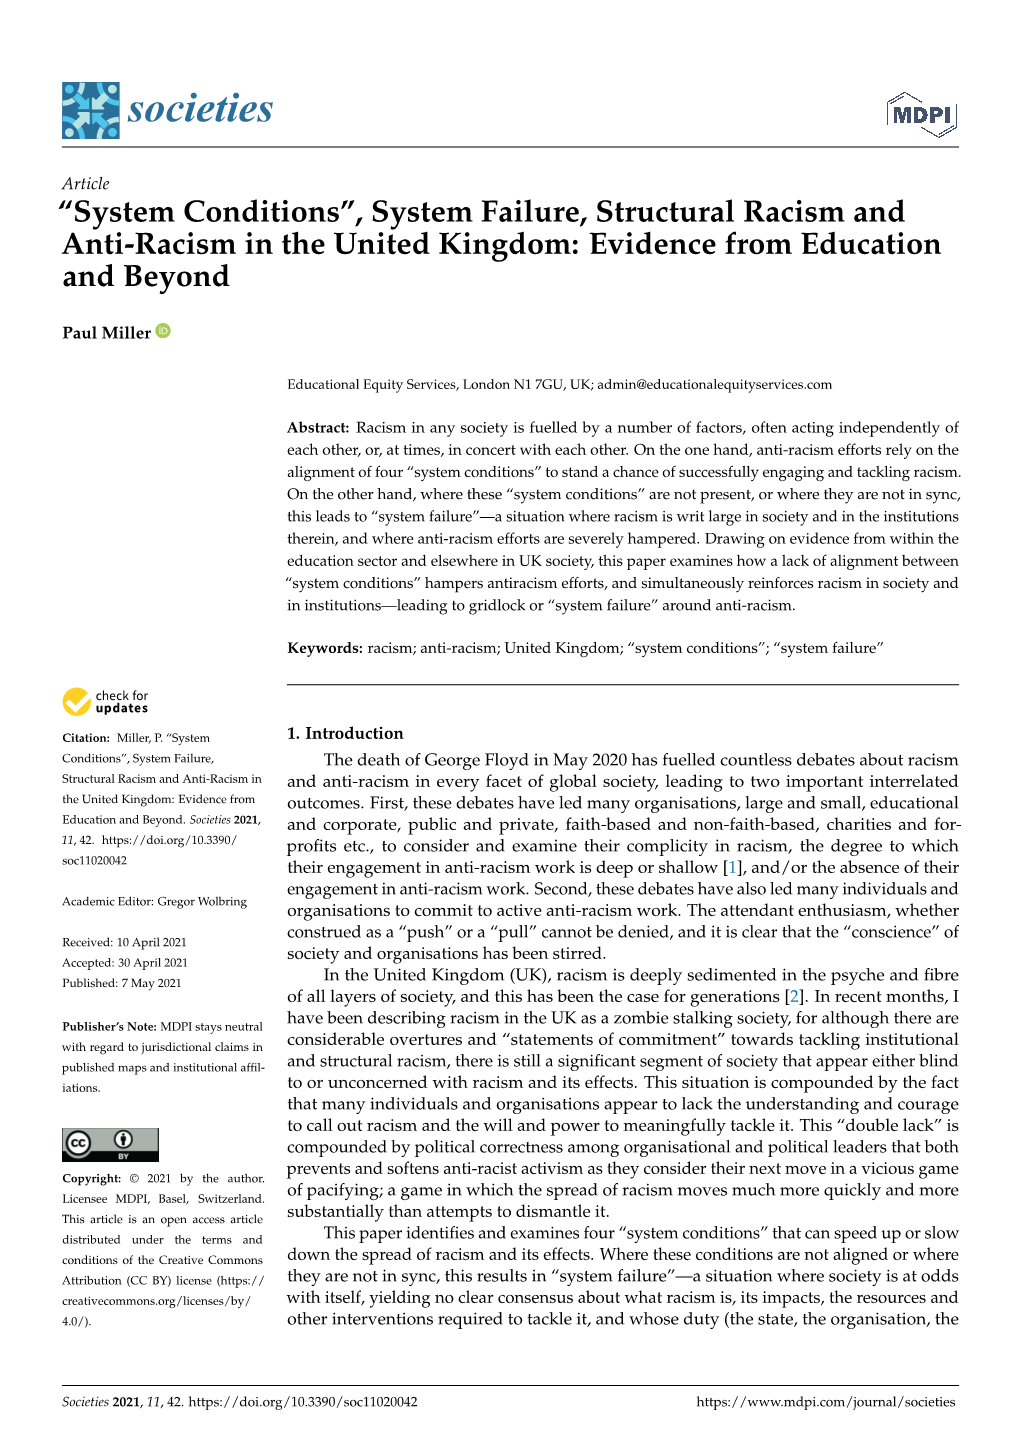 System Failure, Structural Racism and Anti-Racism in the United Kingdom: Evidence from Education and Beyond